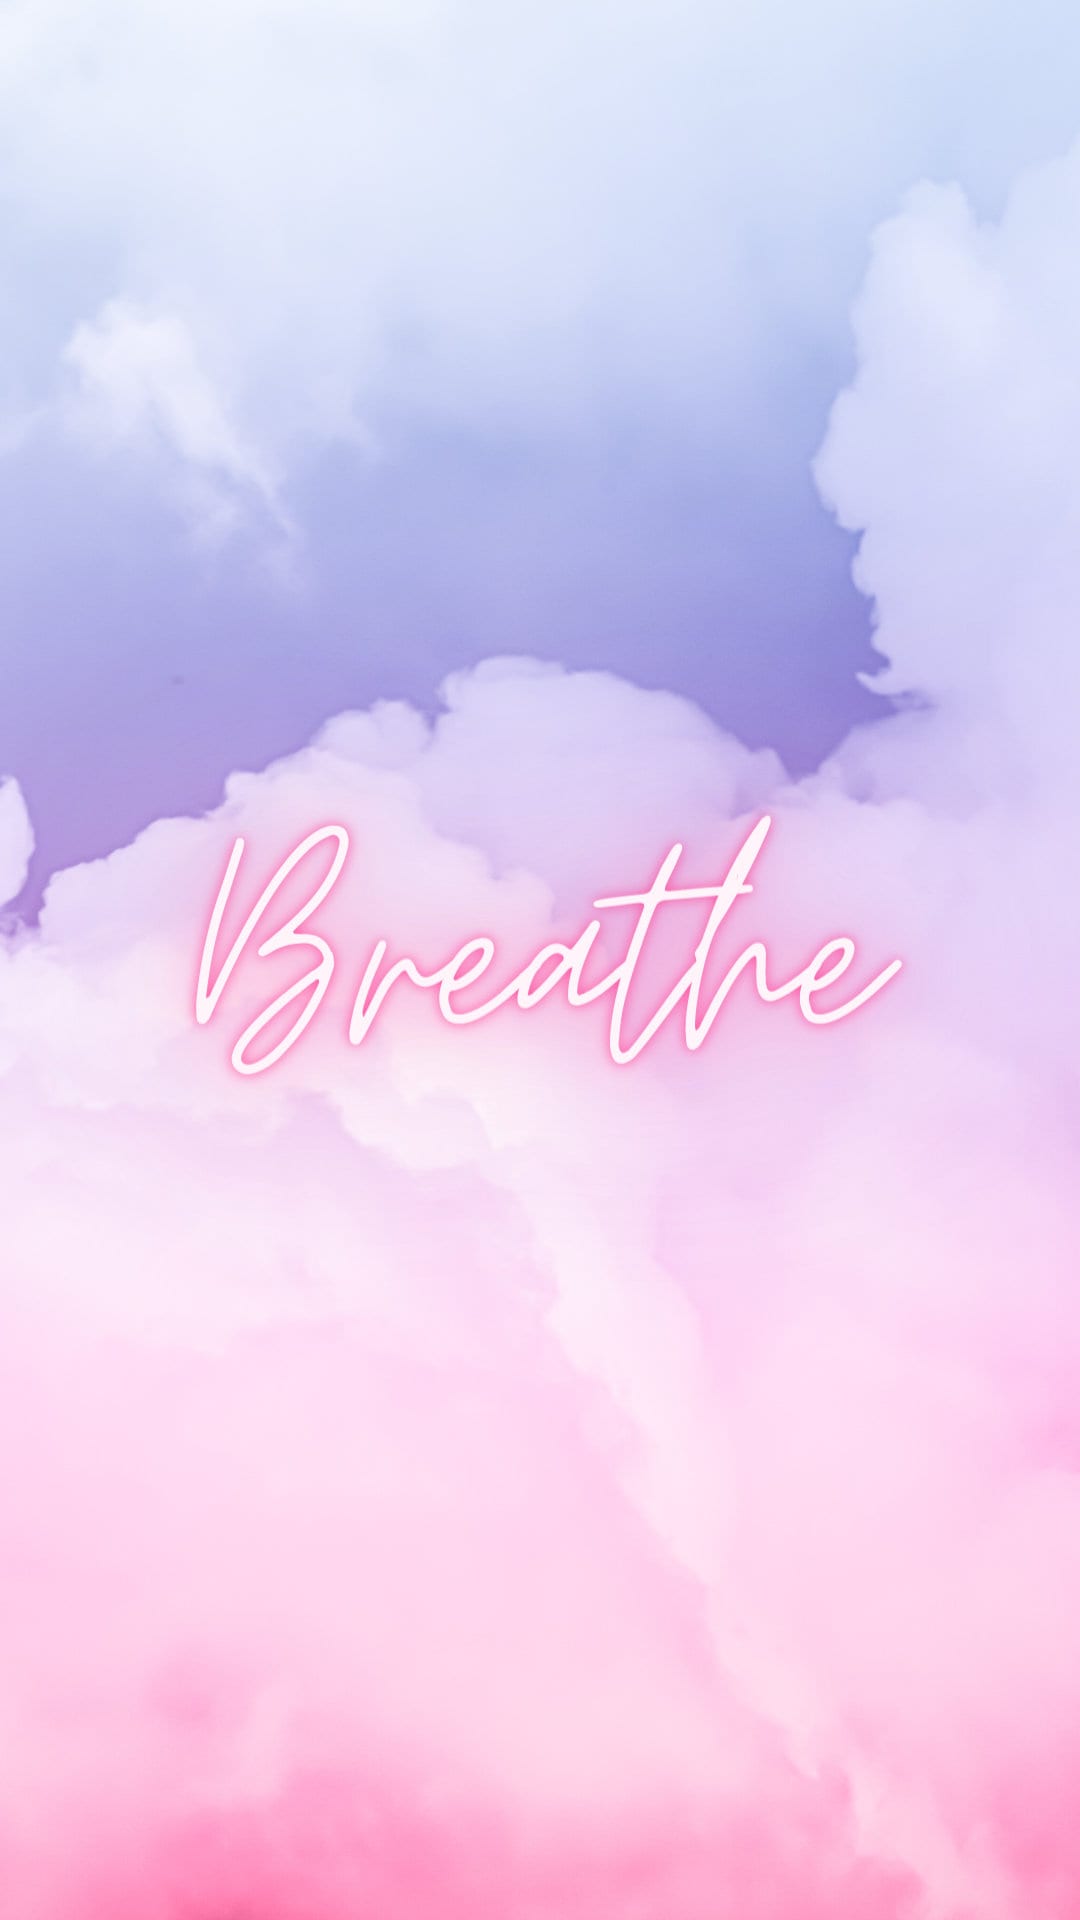 Phone Wallpaper Clouds Breathe Meditation Anxiety